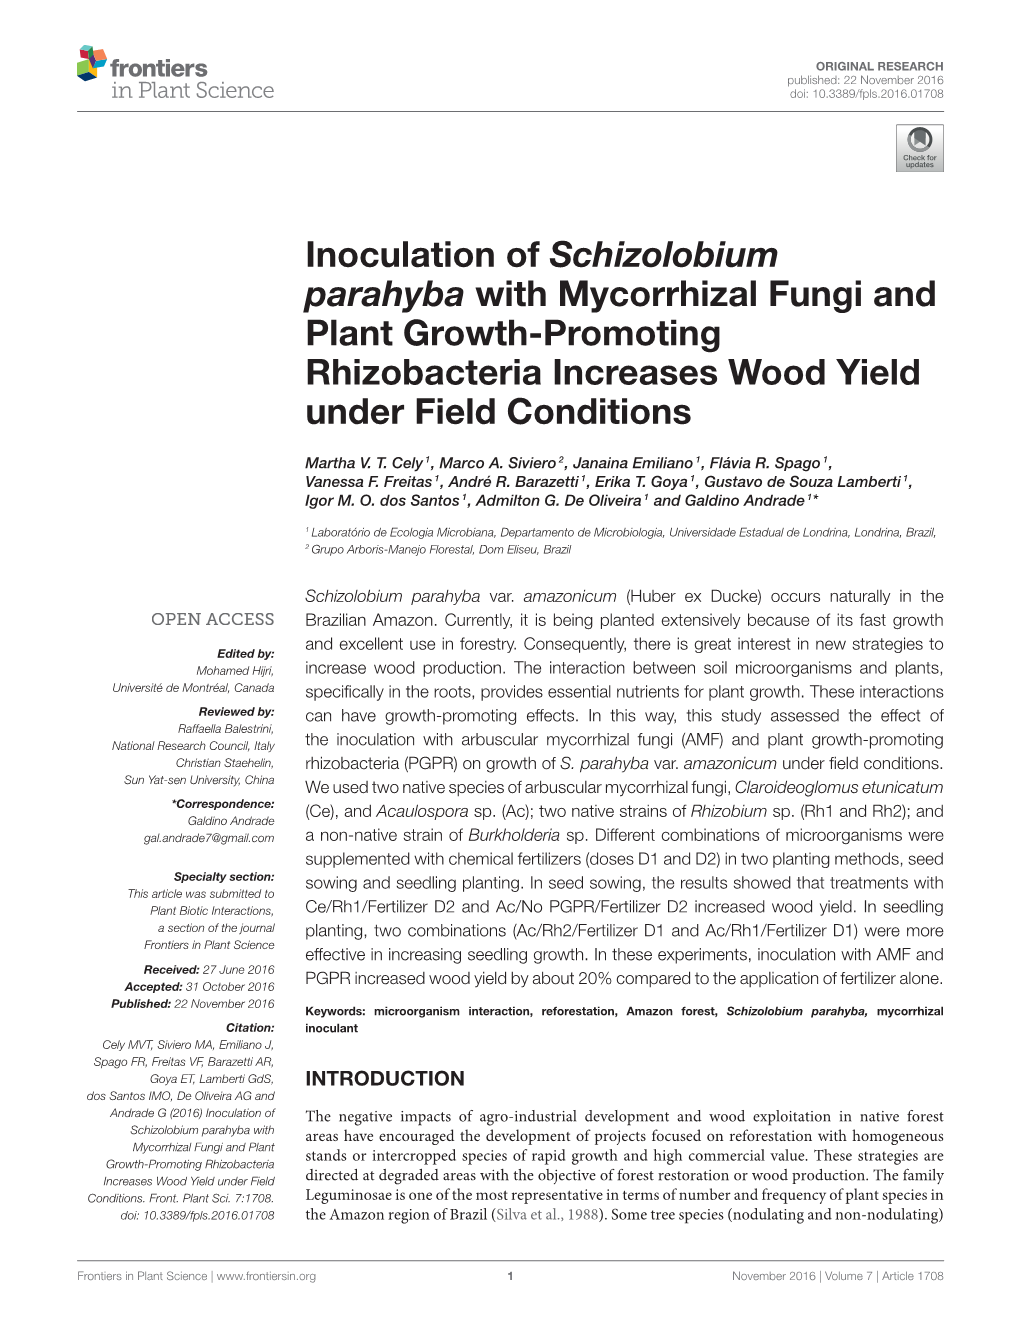 Inoculation of Schizolobium Parahyba with Mycorrhizal Fungi and Plant Growth-Promoting Rhizobacteria Increases Wood Yield Under Field Conditions